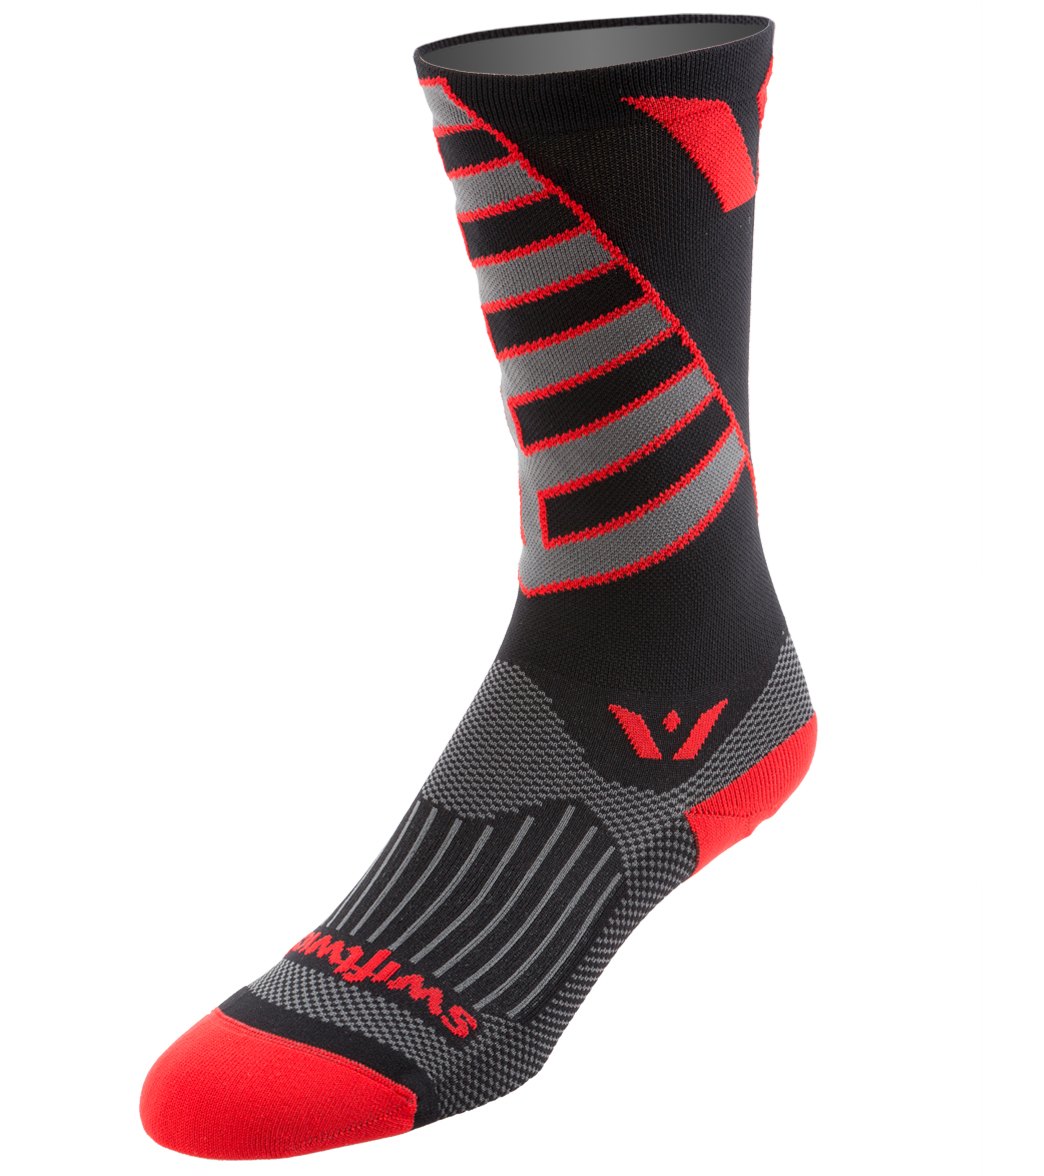 Swiftwick Vision Eights Sock - Black/Red Small - Swimoutlet.com